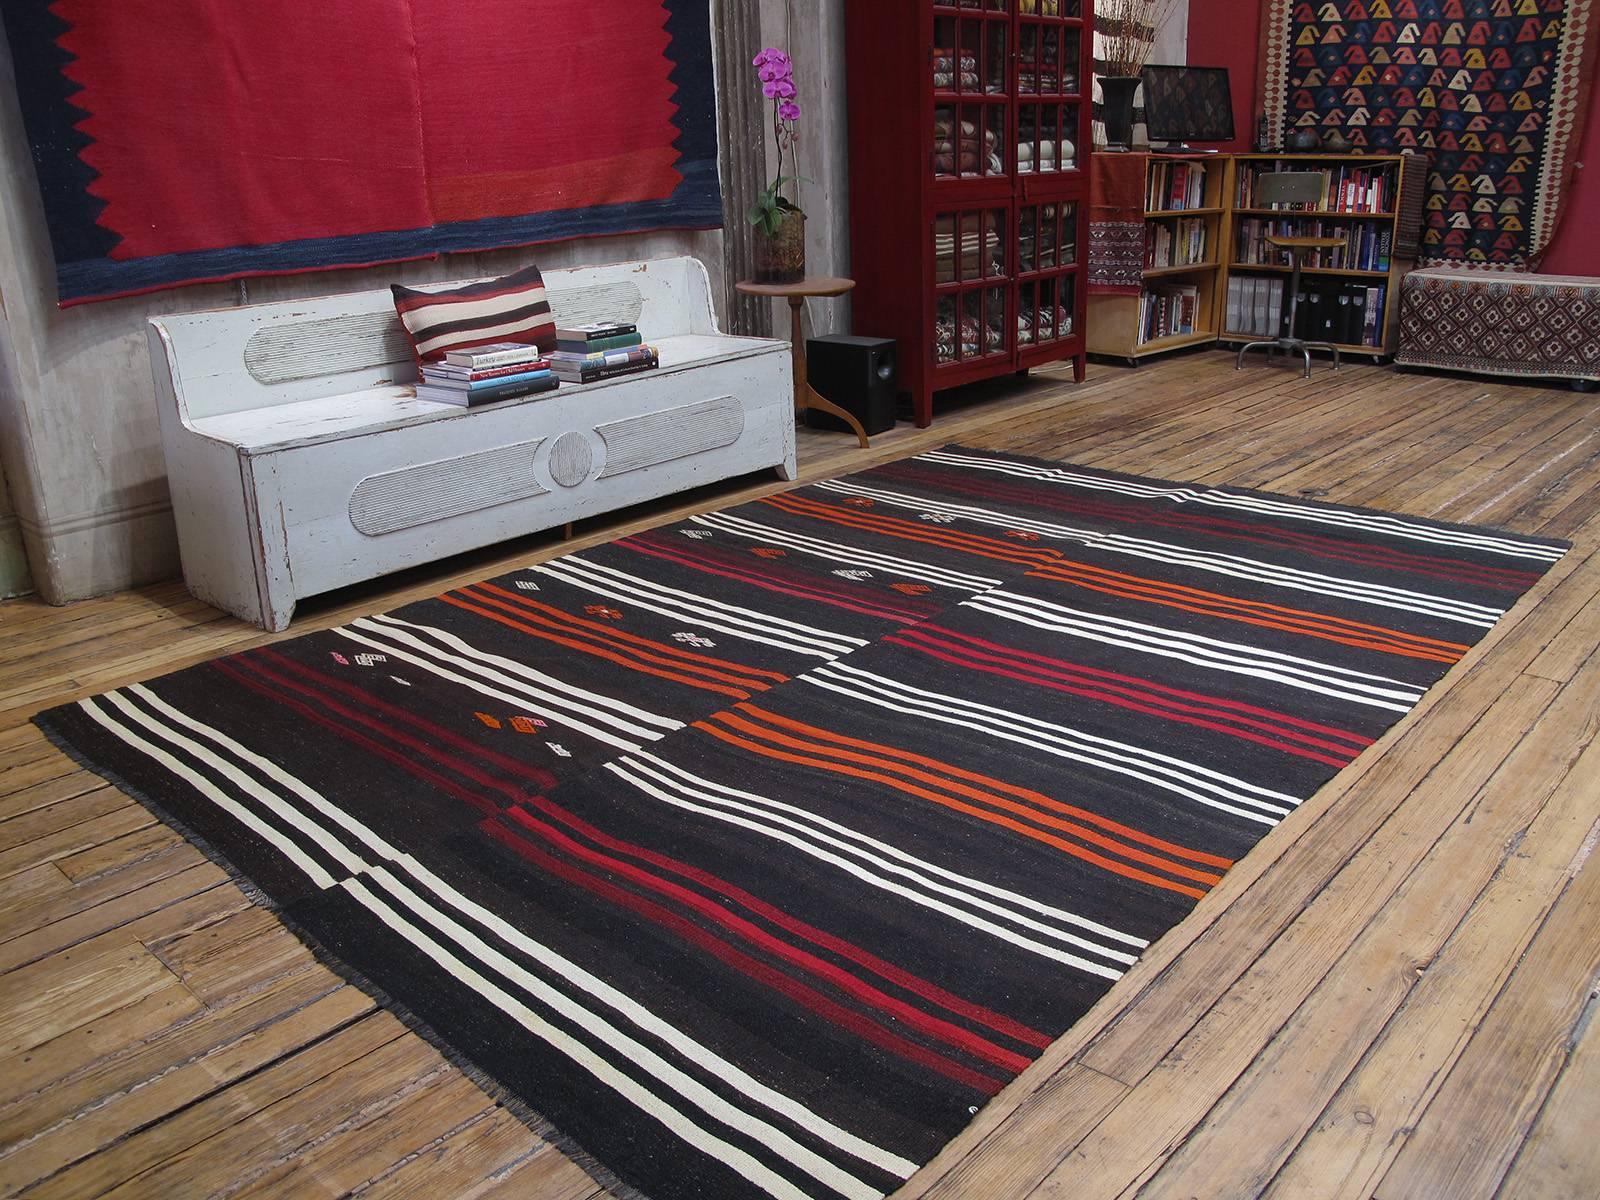 Striped goat hair Kilim rug. A large tribal floor cover or rug from Southeastern Turkey, woven in two panels on a narrow home loom. It is a rough, heavy and Primitive piece with dark brown goat hair and brightly colored stripes and scattered tribal